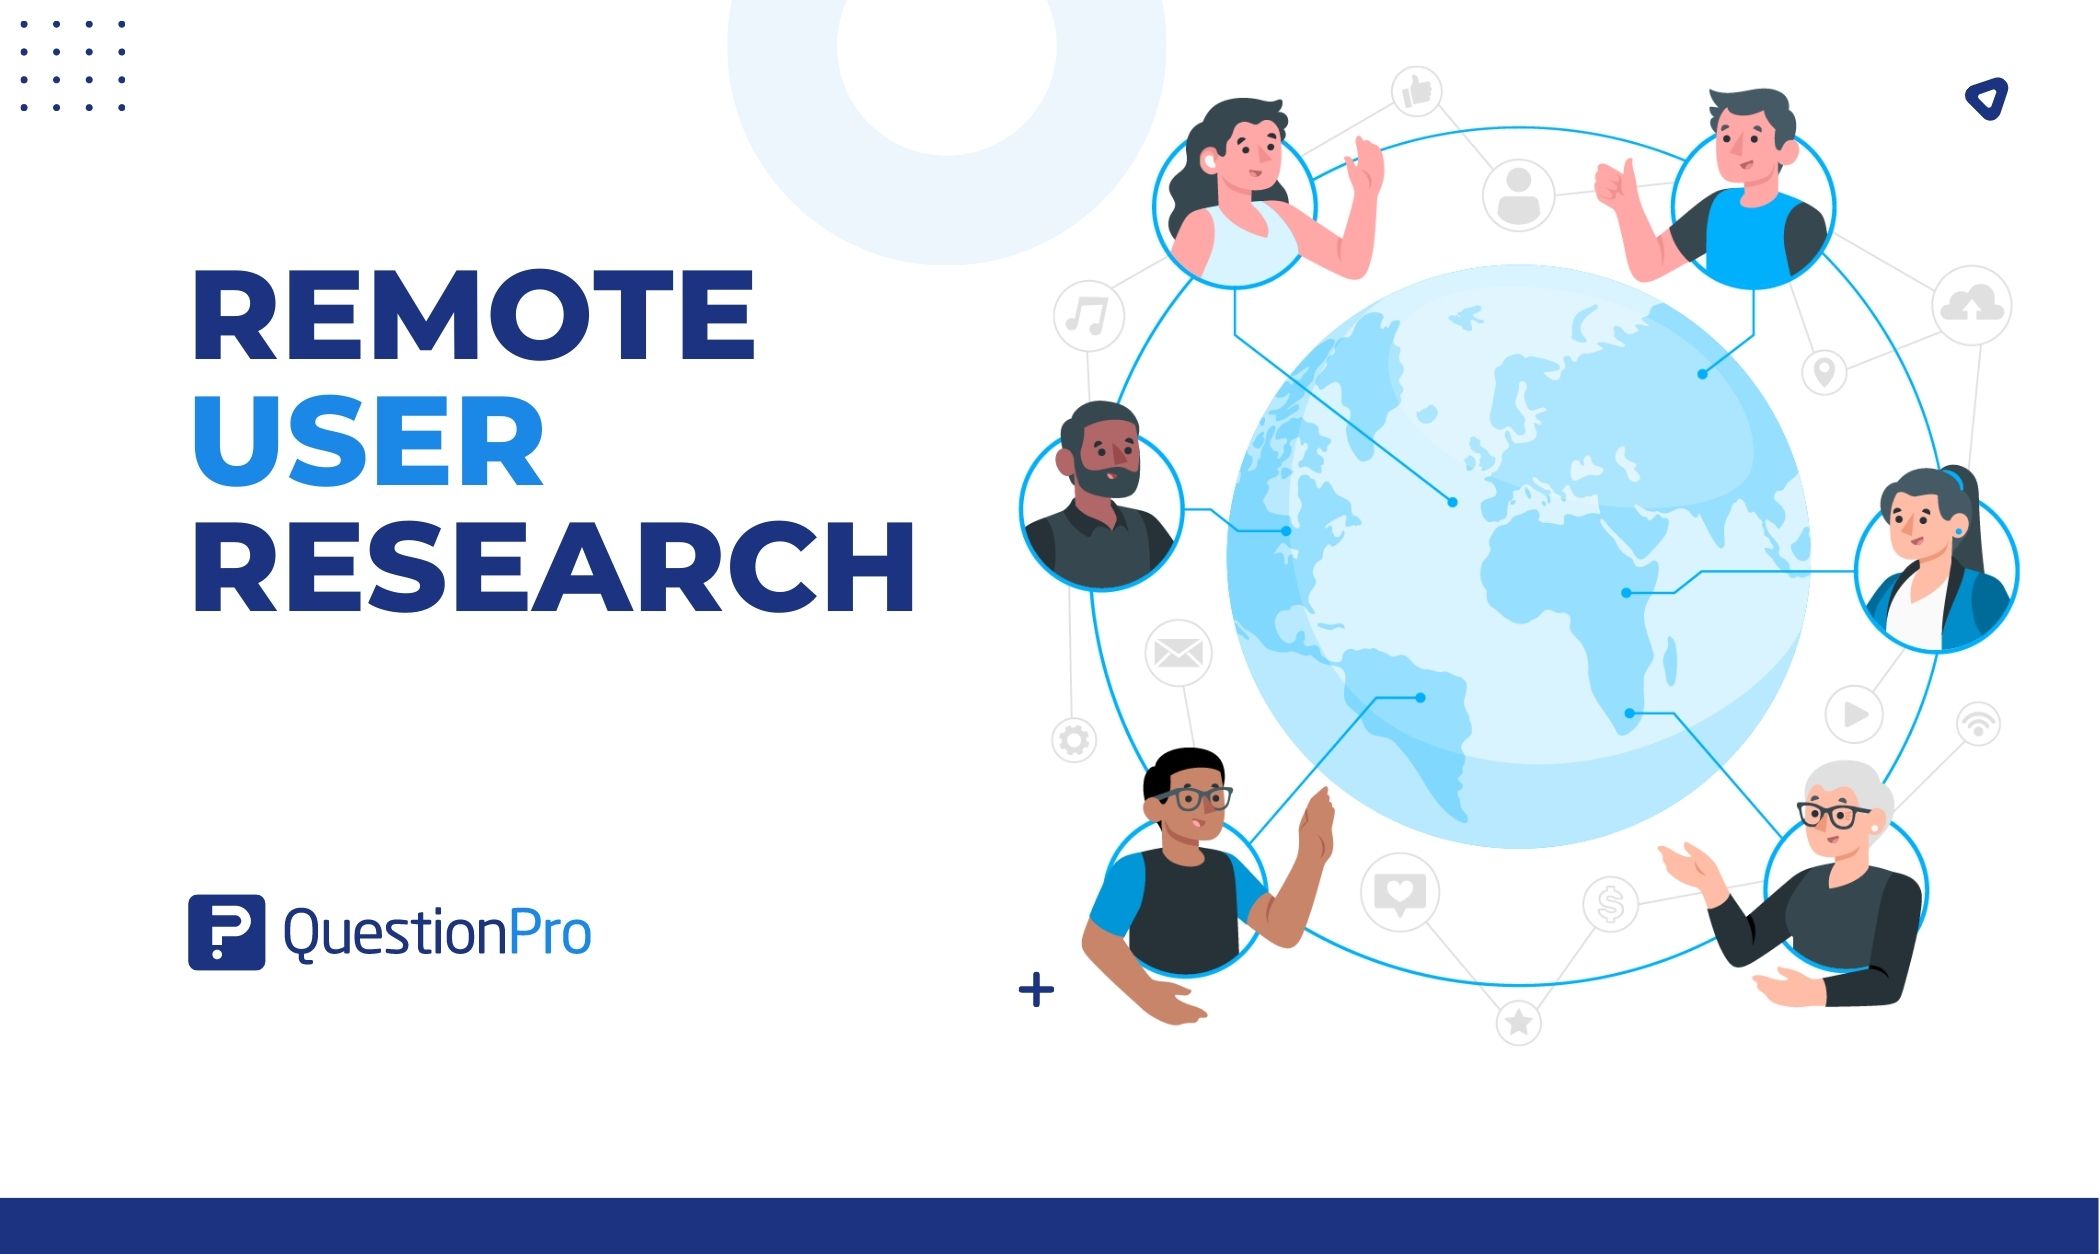 Remote user research lets researchers get valuable information from users worldwide. Learn how to conduct effective remote research here.